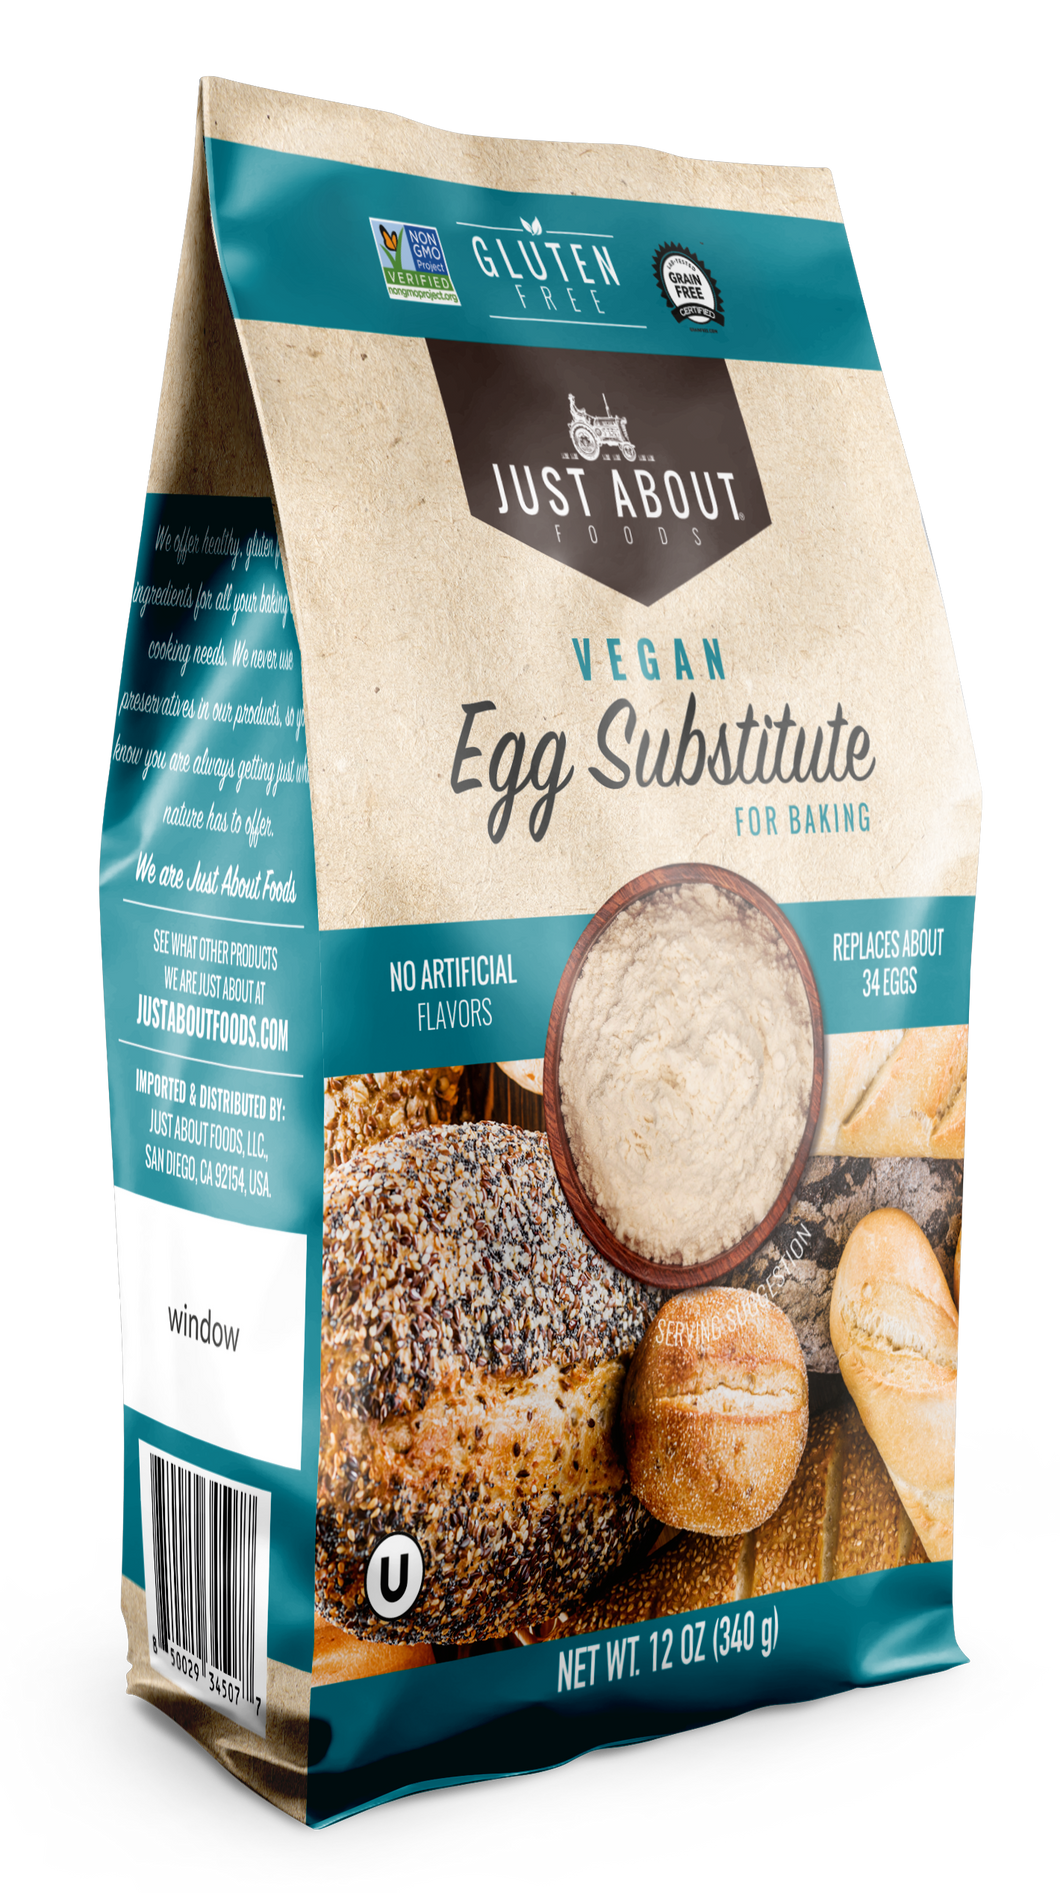 Just About Foods - Gluten Free Vegan Egg Substitute 12 oz